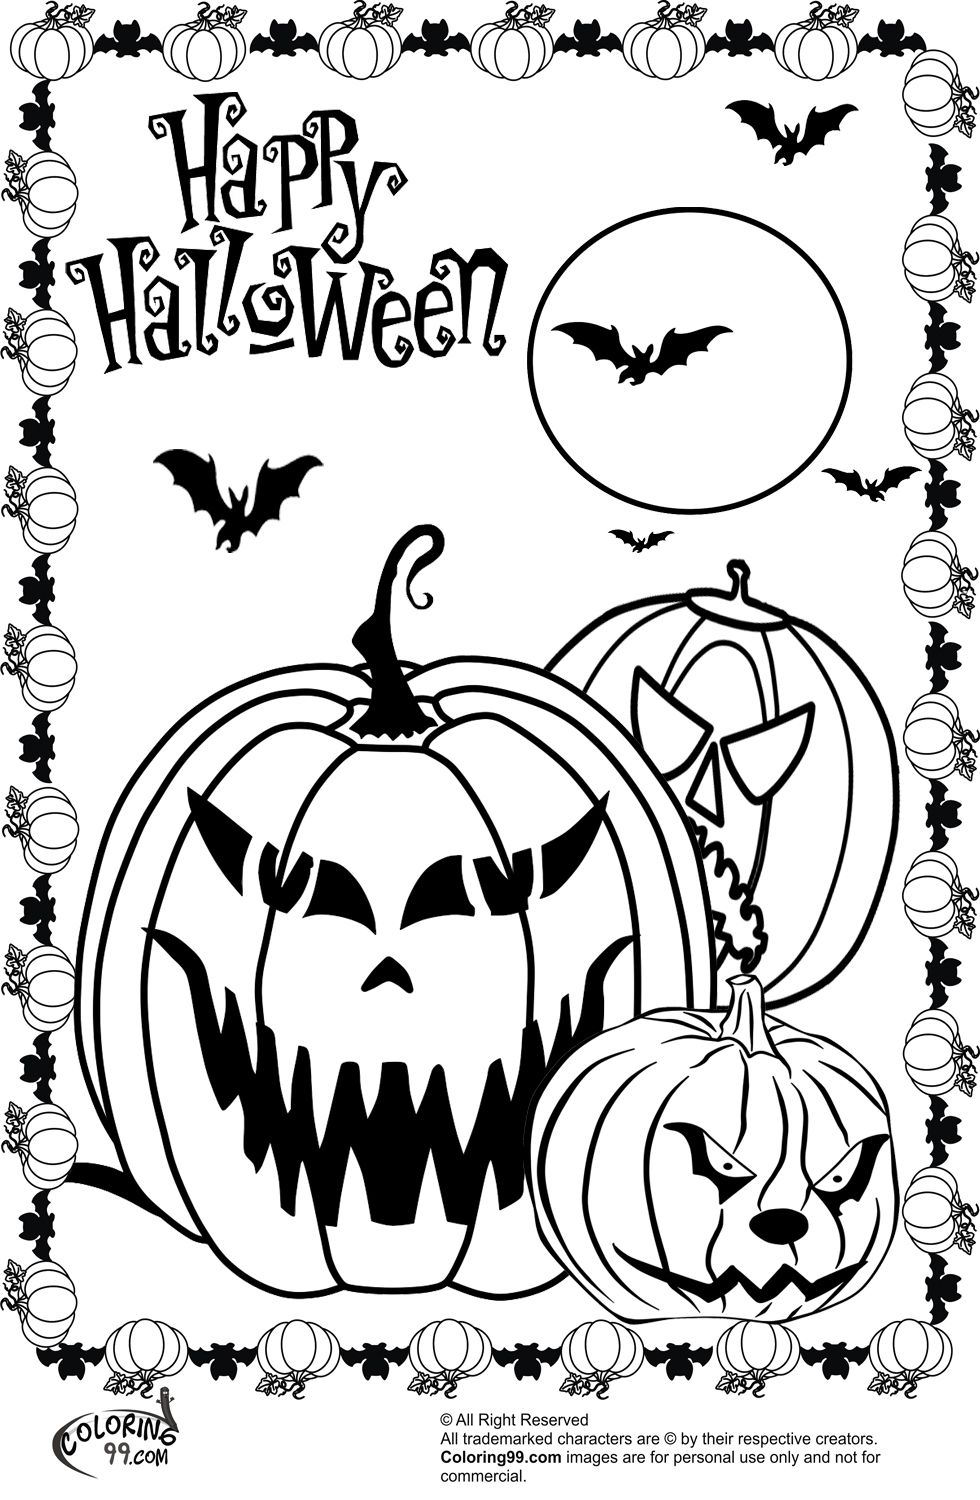 Halloween Coloring Pages Free Printable Scary - Coloring Home